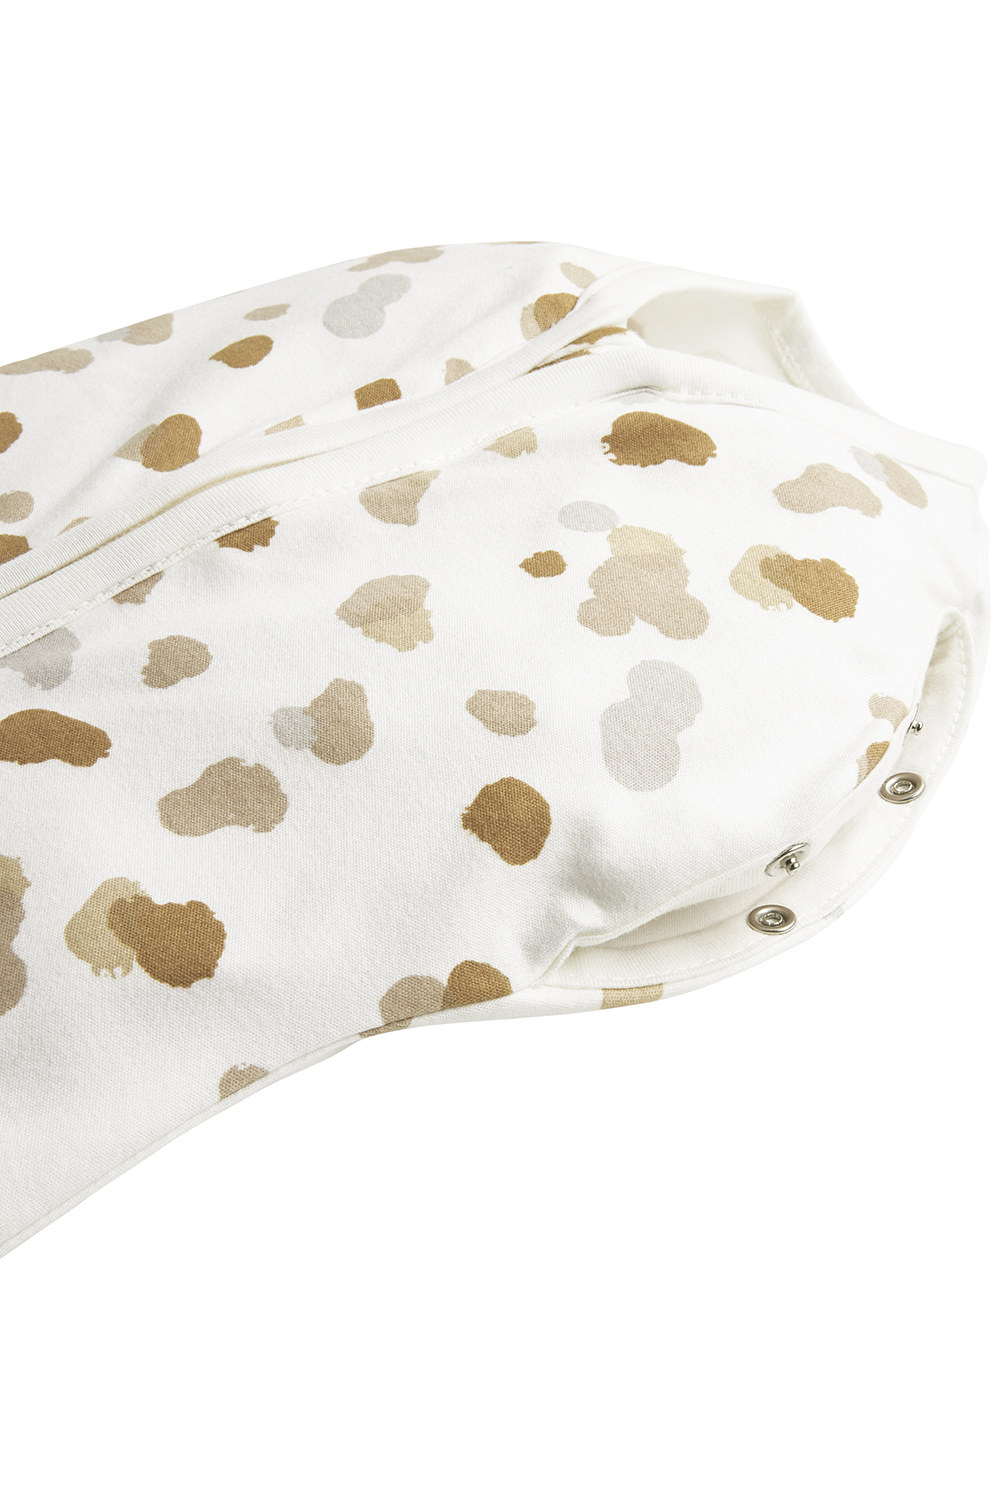 Cocoon Swaddle Bag Stains - sand - 70cm